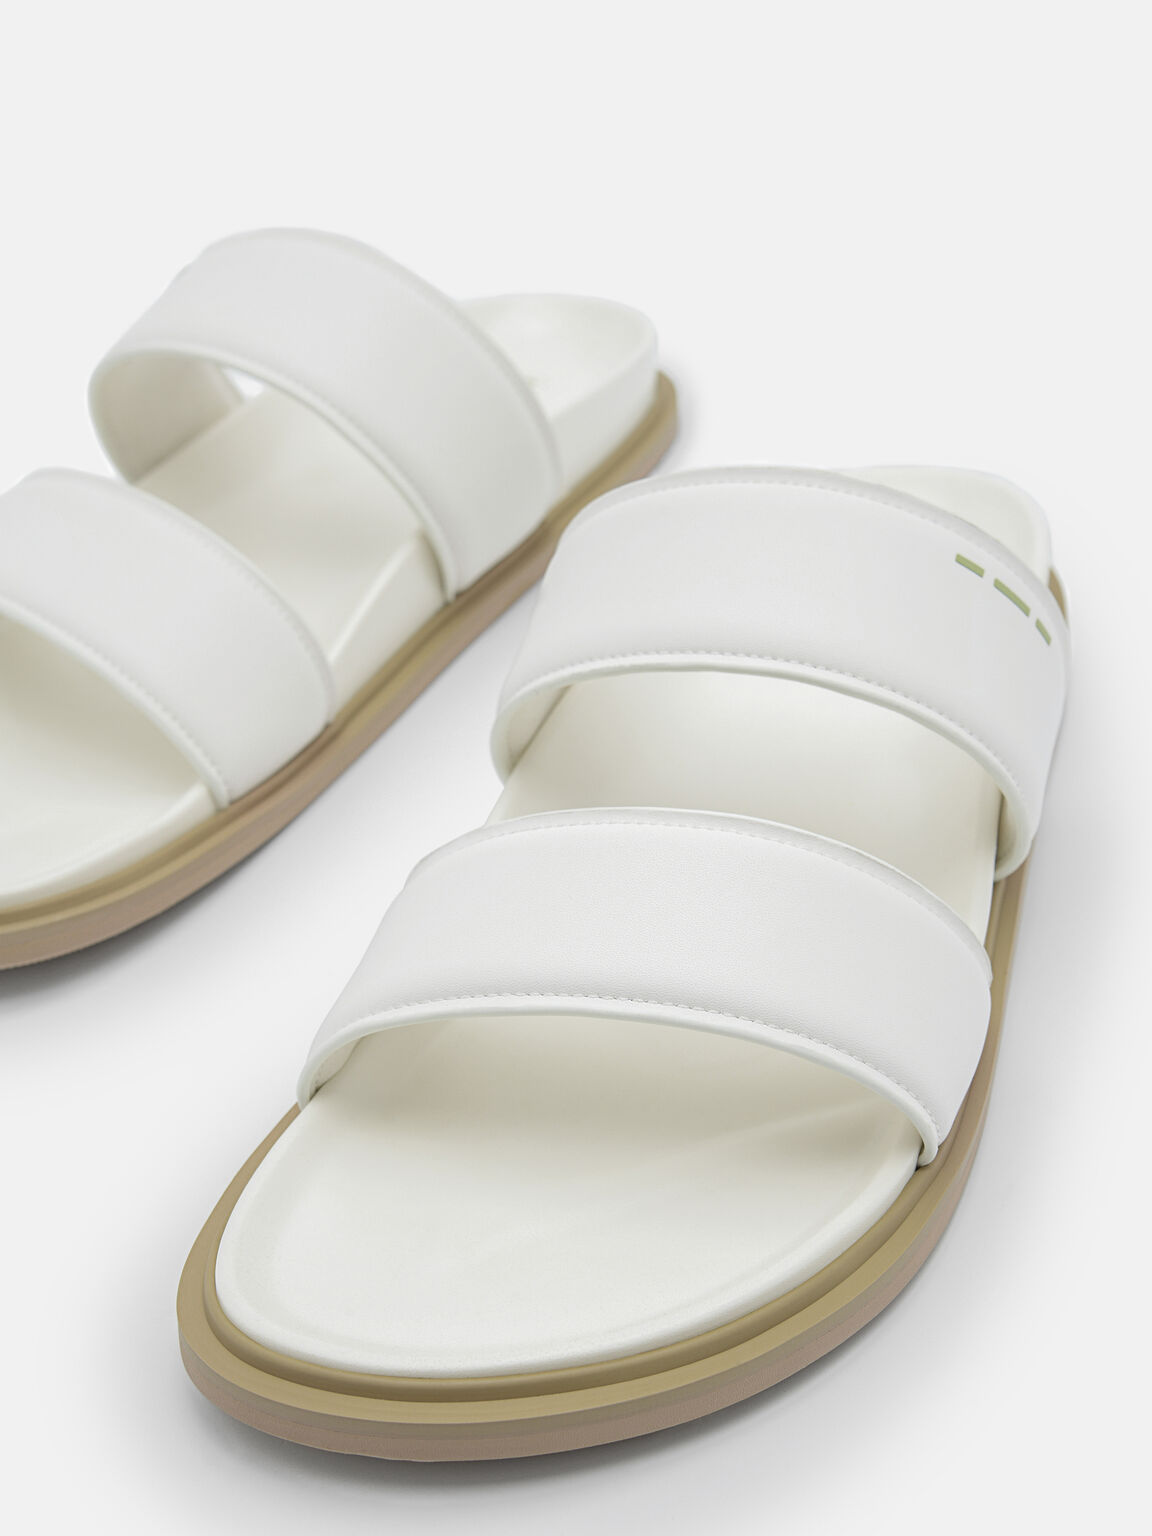 Men's rePEDRO Recycled Leather Slide Sandals, White, hi-res